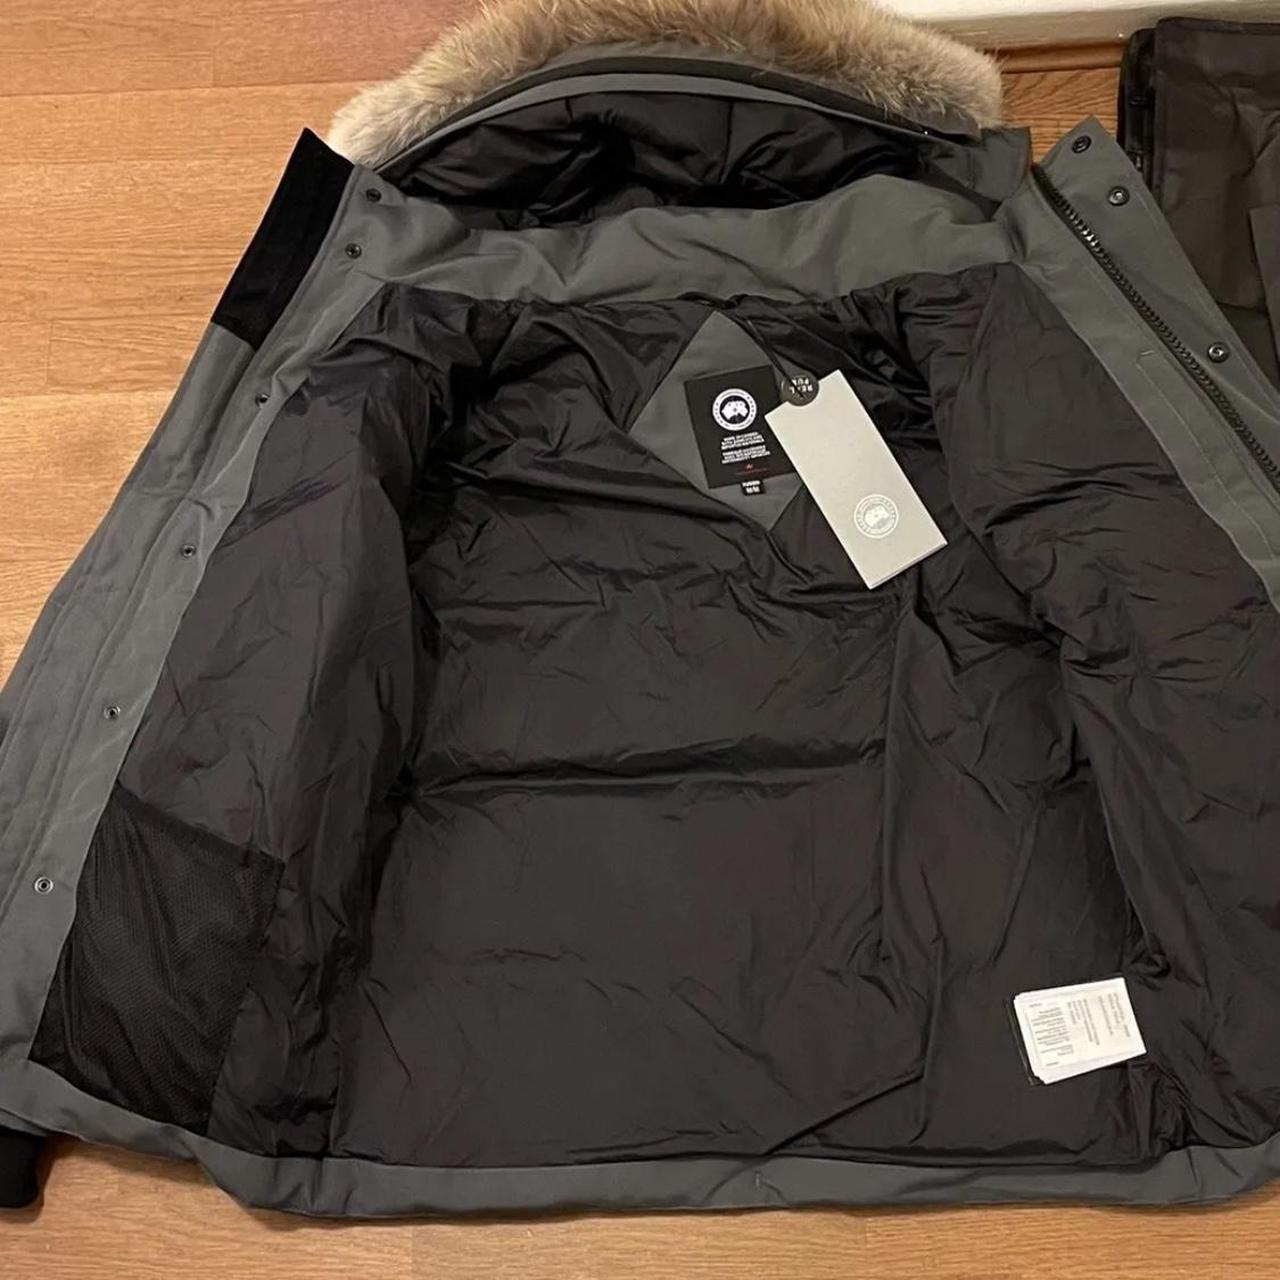 Grey Canada goose jacket size M new with tags - Depop